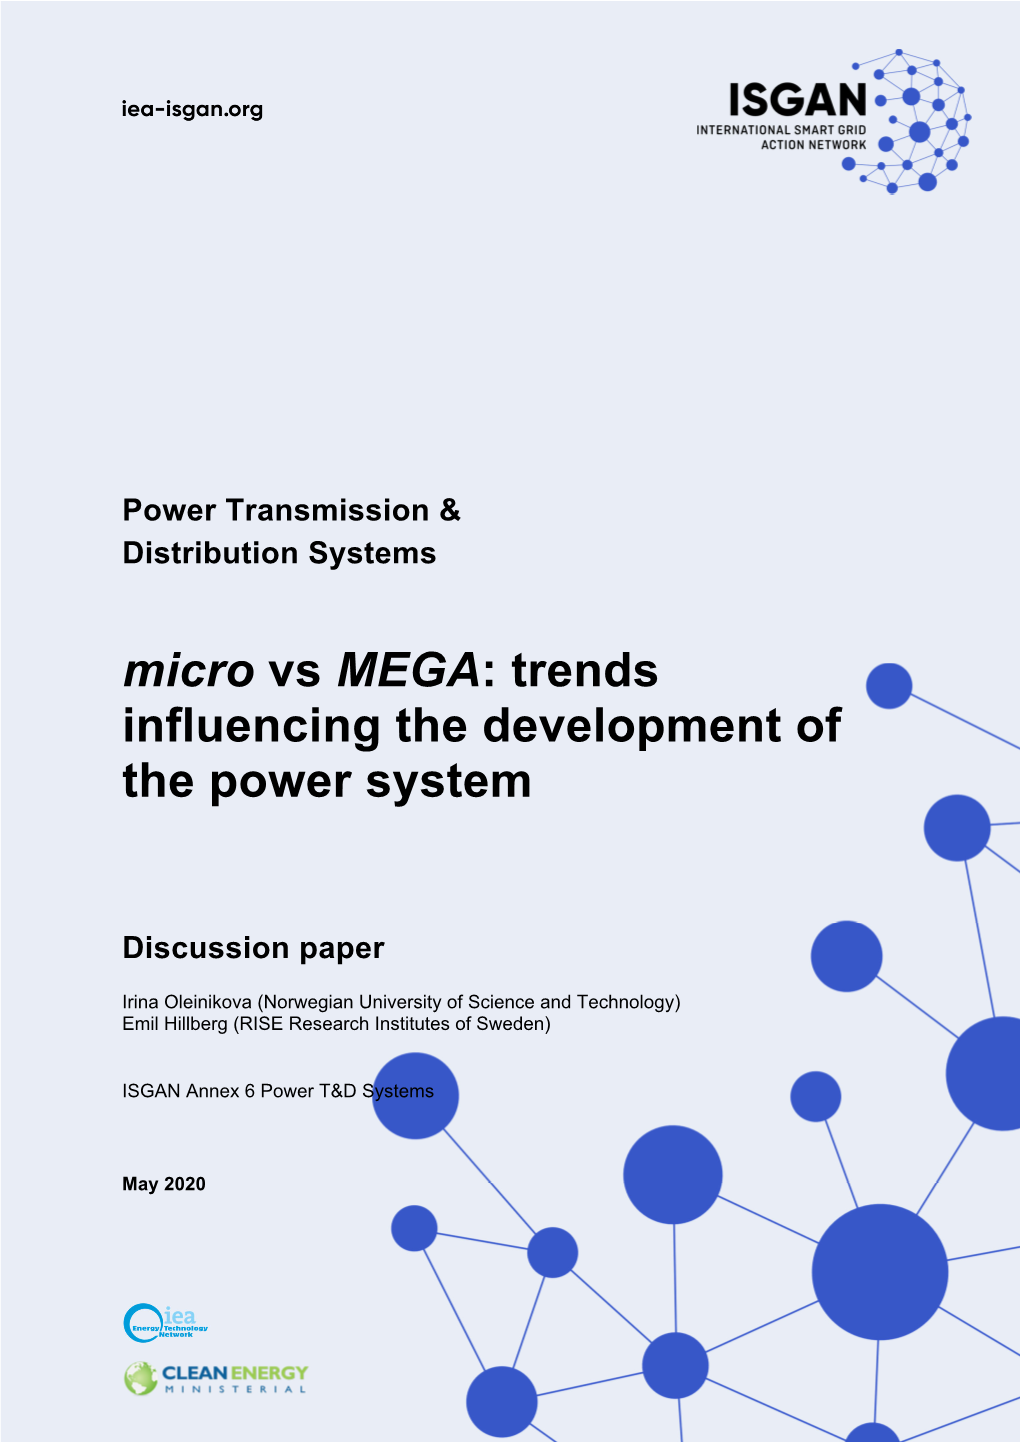 Micro Vs MEGA: Trends Influencing the Development of the Power System